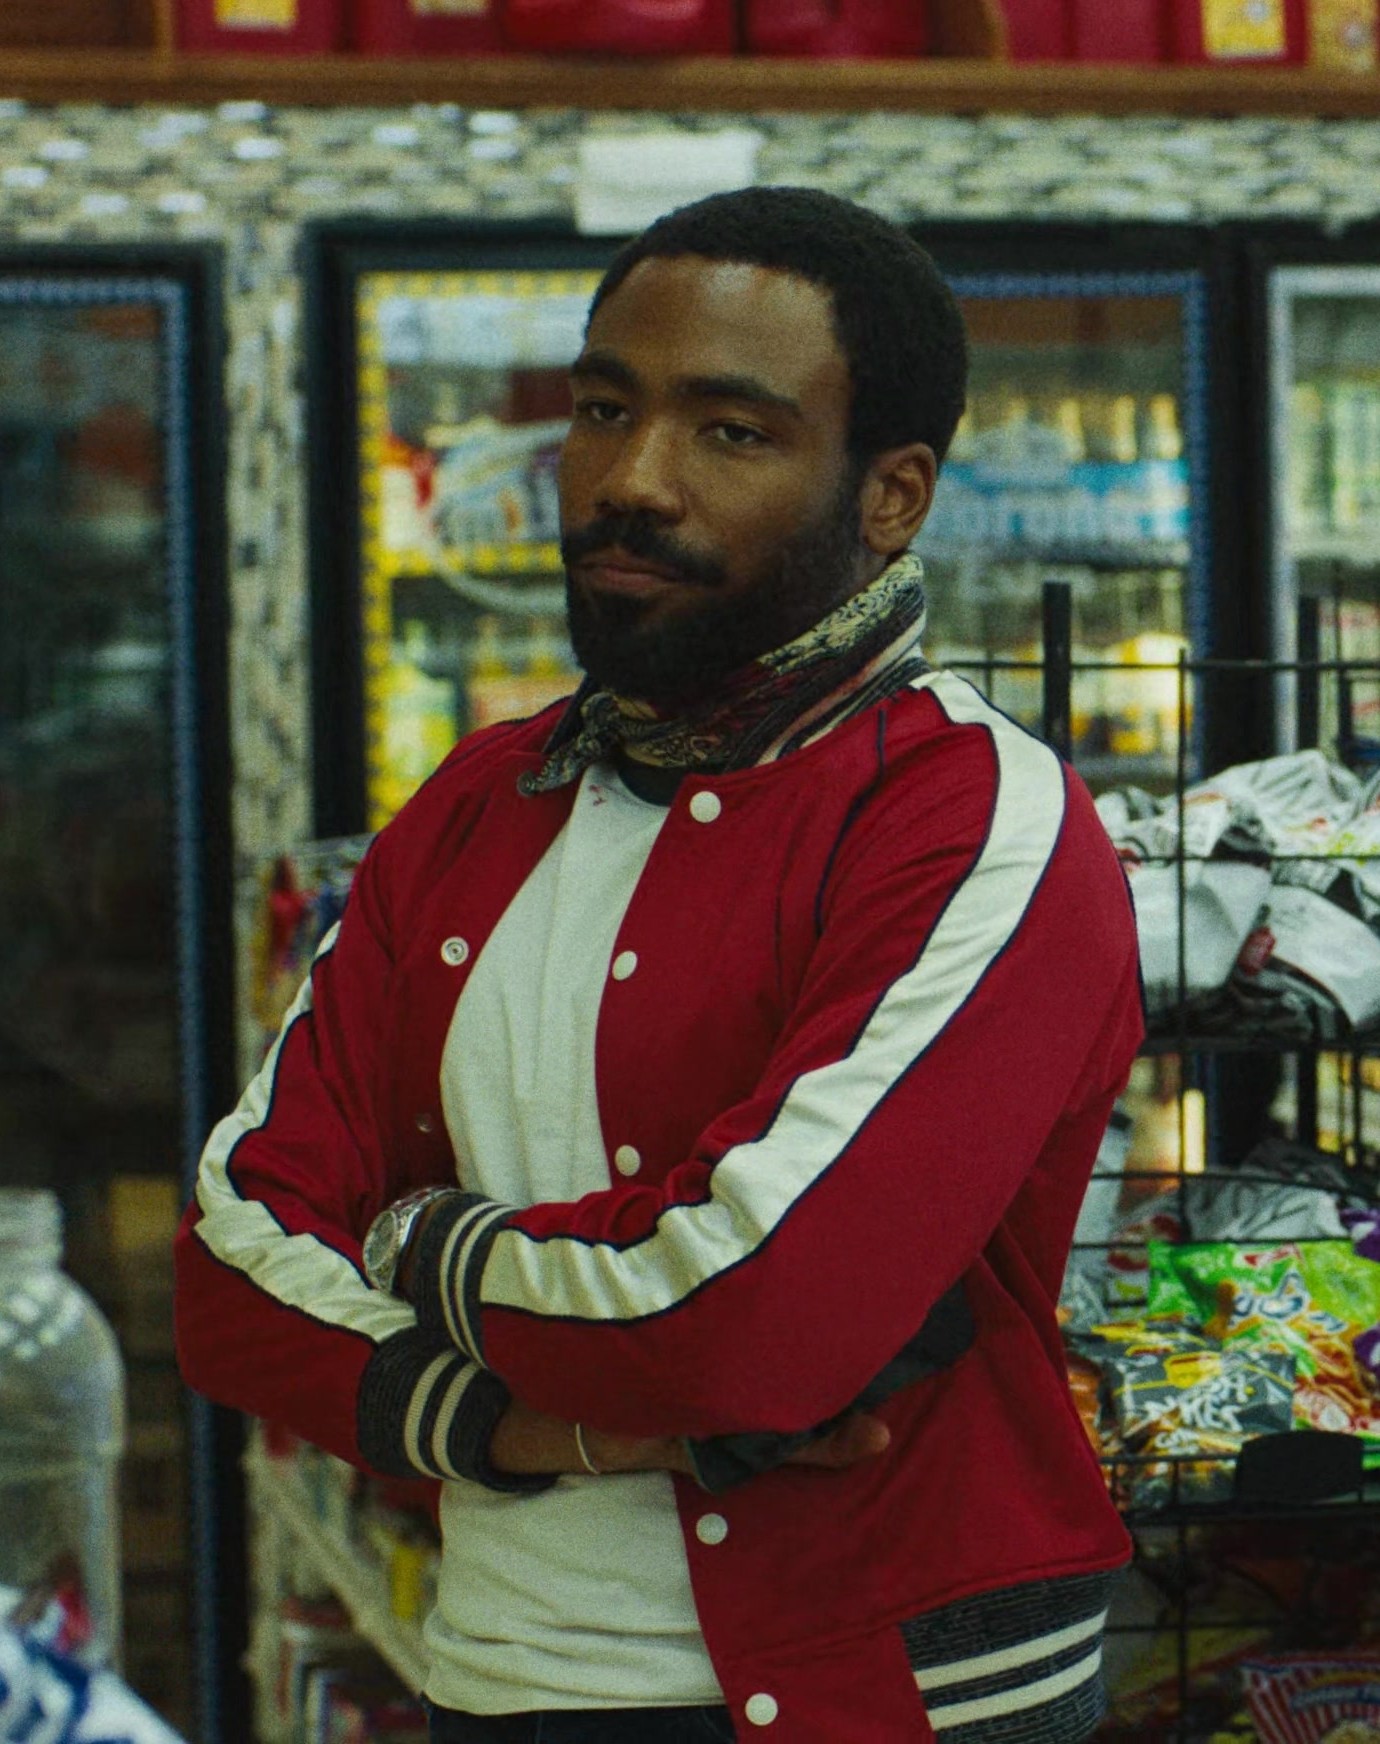 Worn on Mr. & Mrs. Smith TV Show - Red and White Varsity Jacket Worn by Donald Glover as John Smith